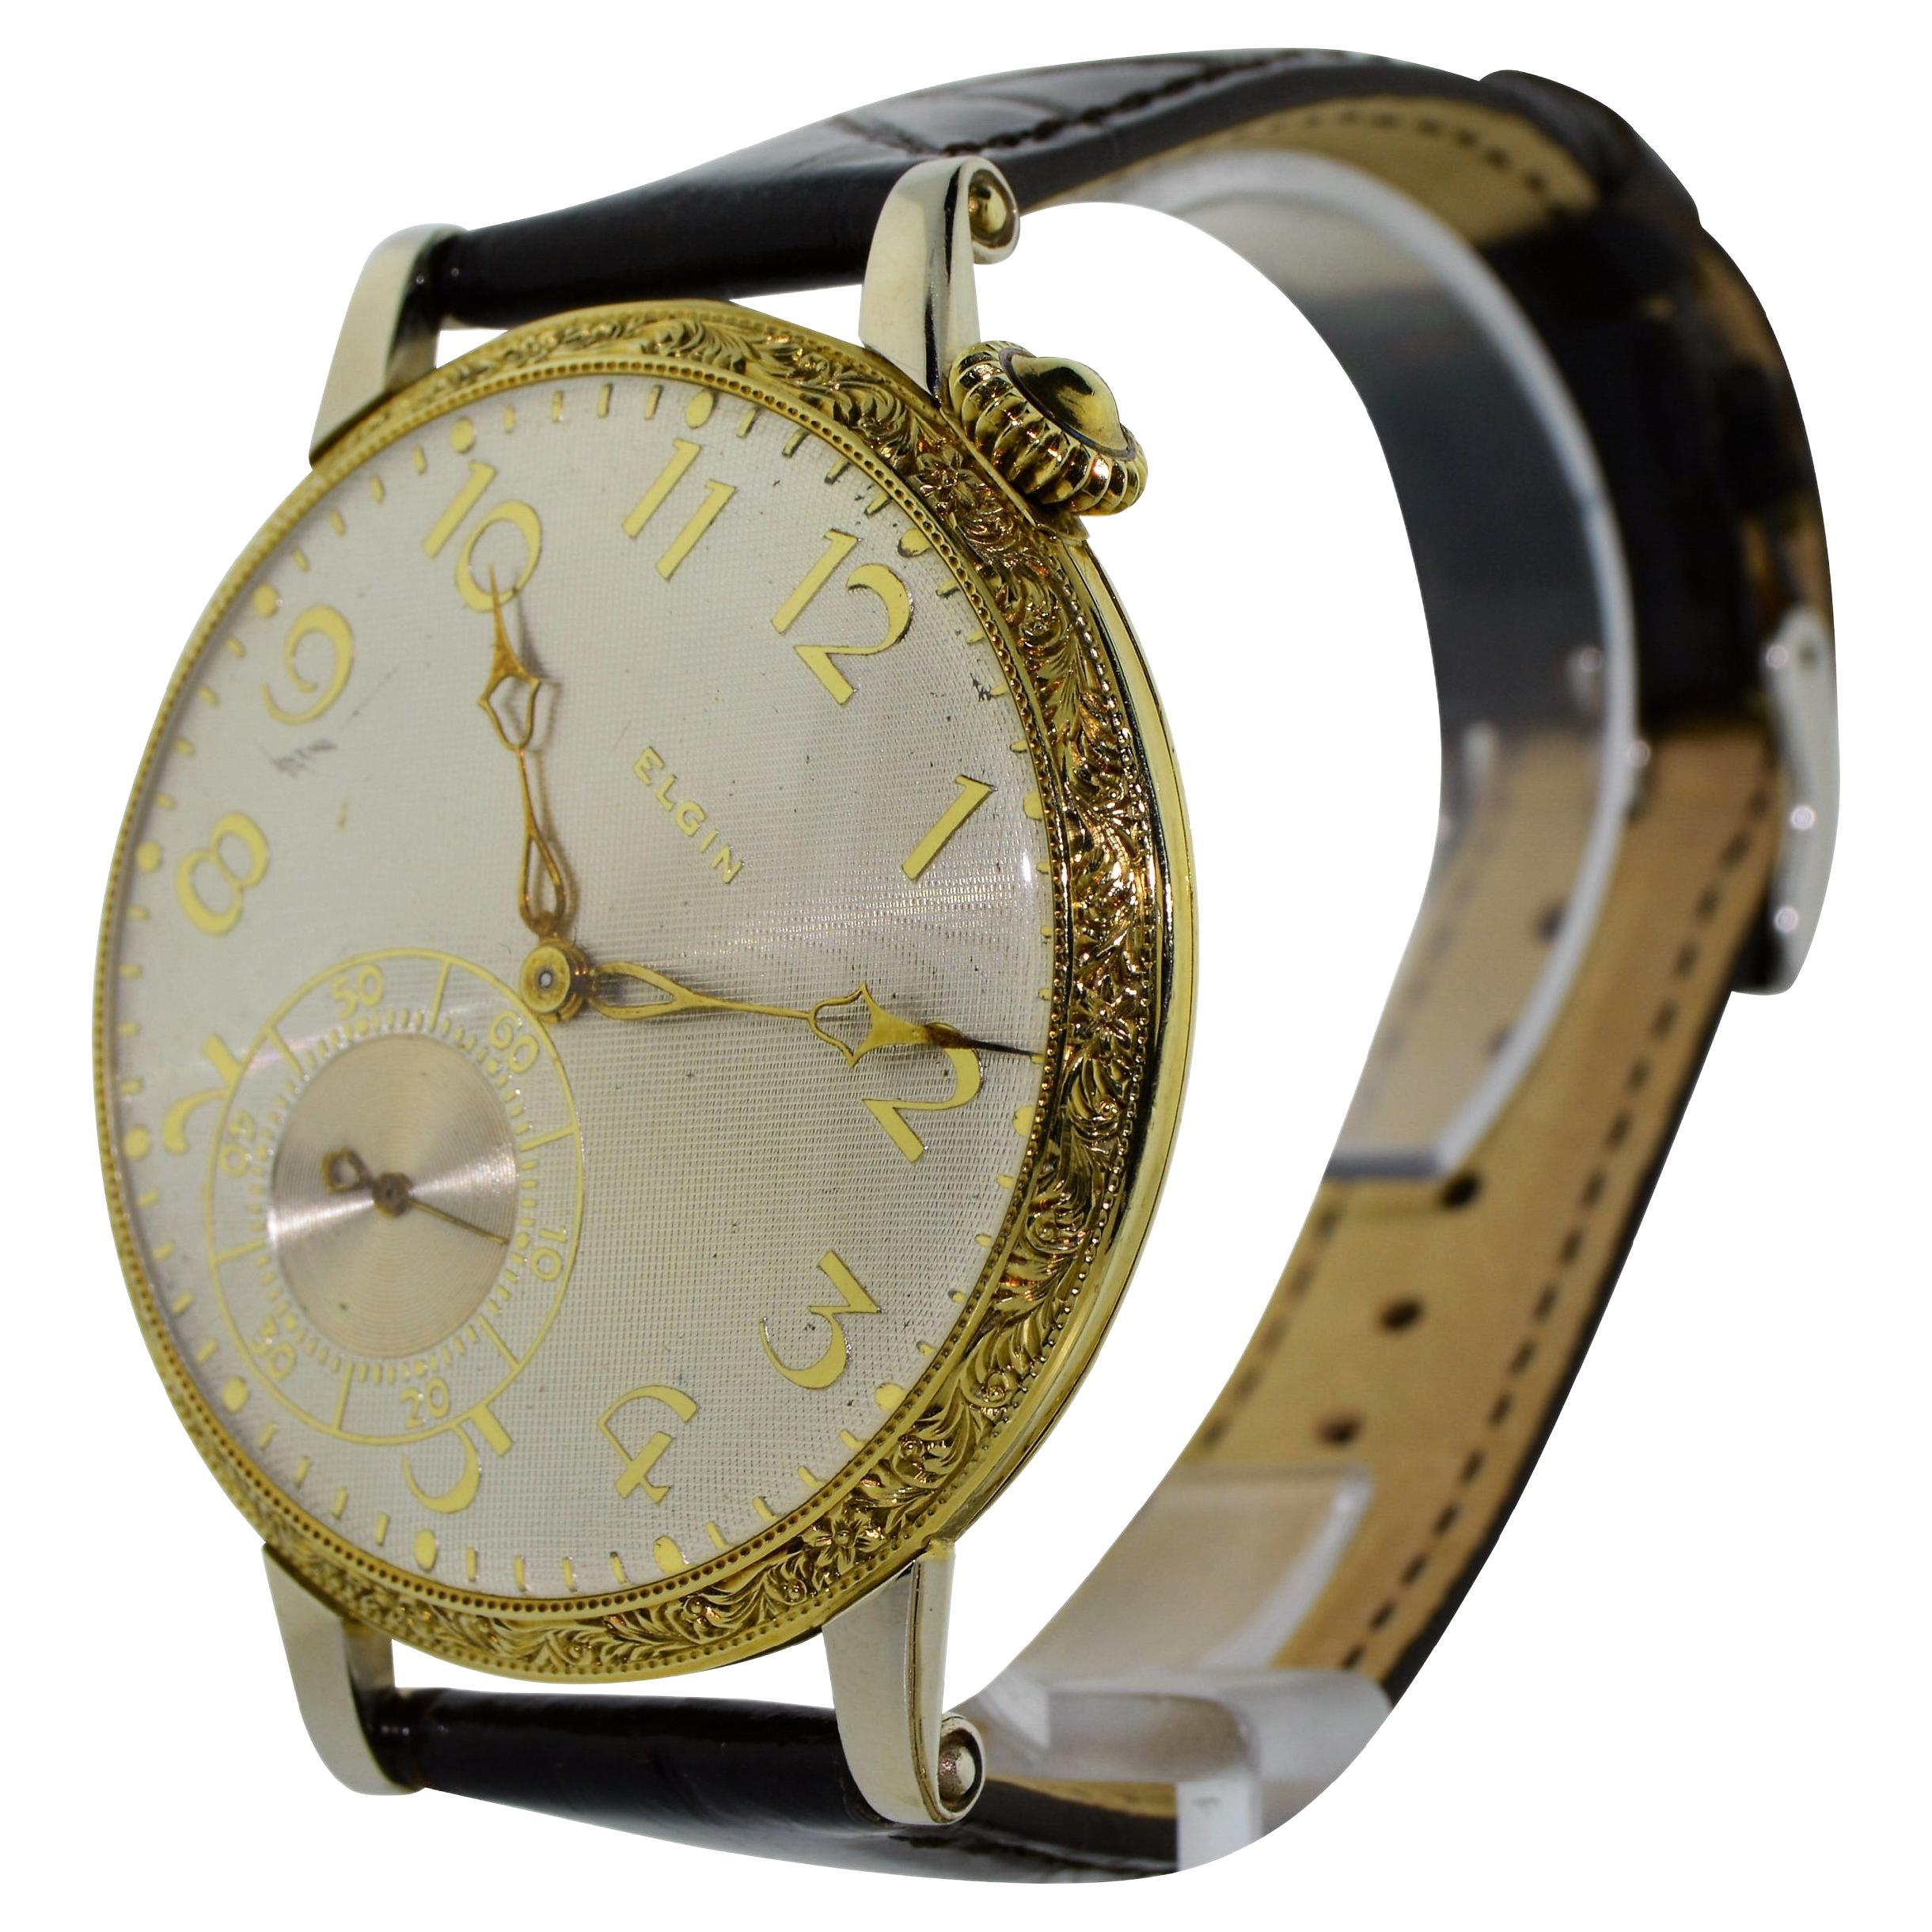 FACTORY / HOUSE: Elgin Watch Company
STYLE / REFERENCE: Art Deco / Wrist / Pocket Watch
METAL / MATERIAL: 14Kt White and Yellow Gold 
DIMENSIONS: Length 53mm  X Diameter 44mm
CIRCA: 1920's
MOVEMENT / CALIBER: Manual Winding / 21 Jewels / High